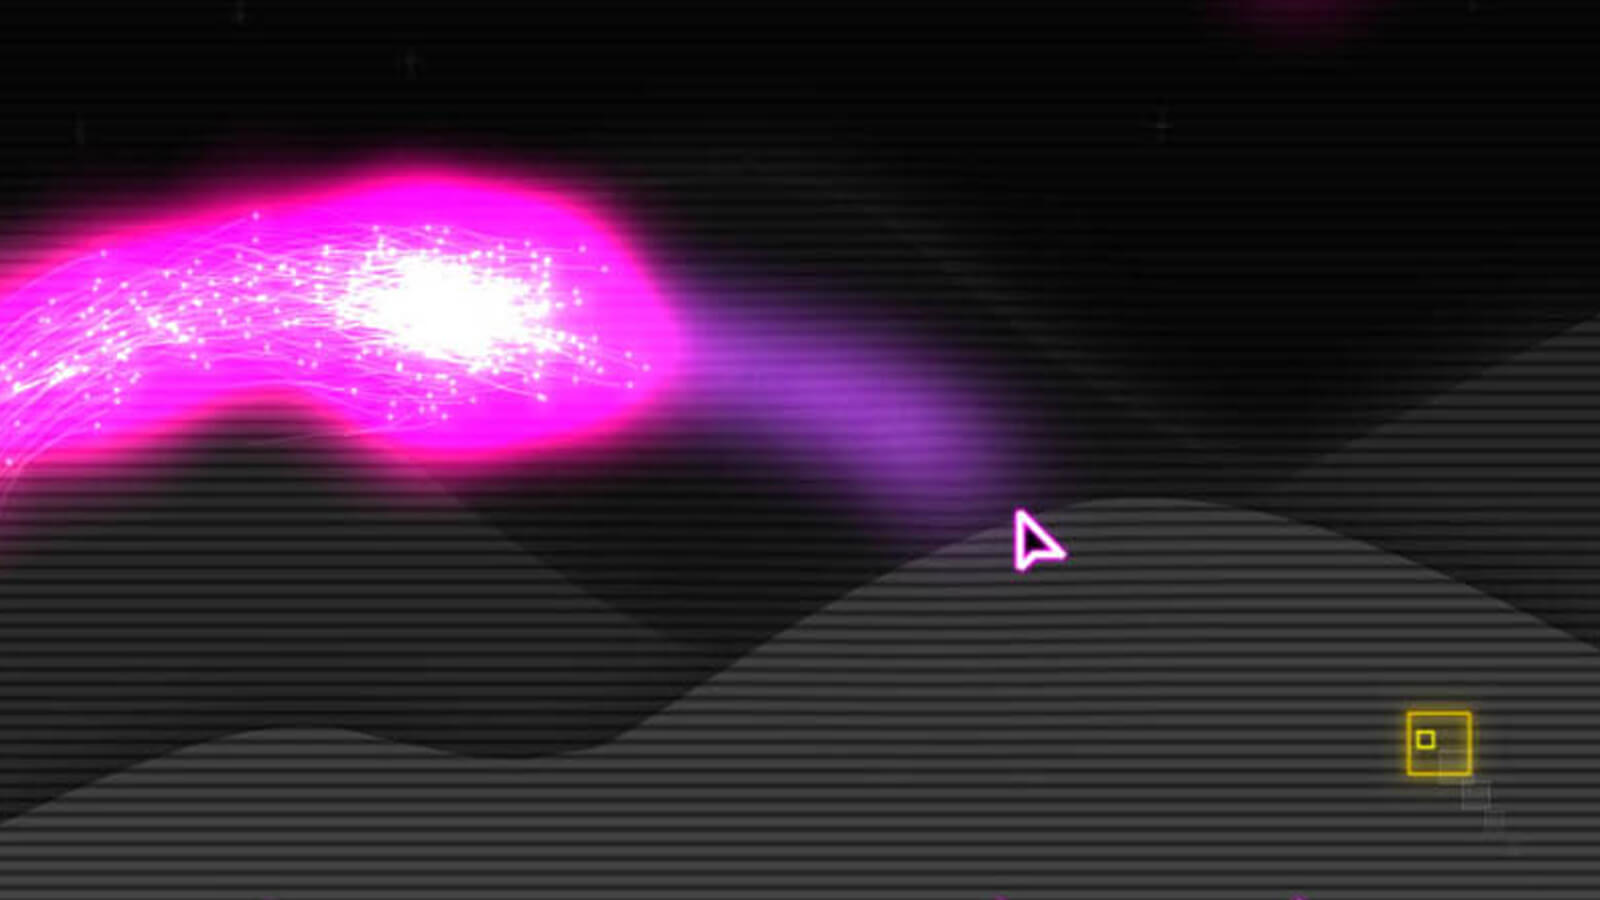 A glowing cloud of magenta particles follows a mouse cursor. A yellow square floats nearby.